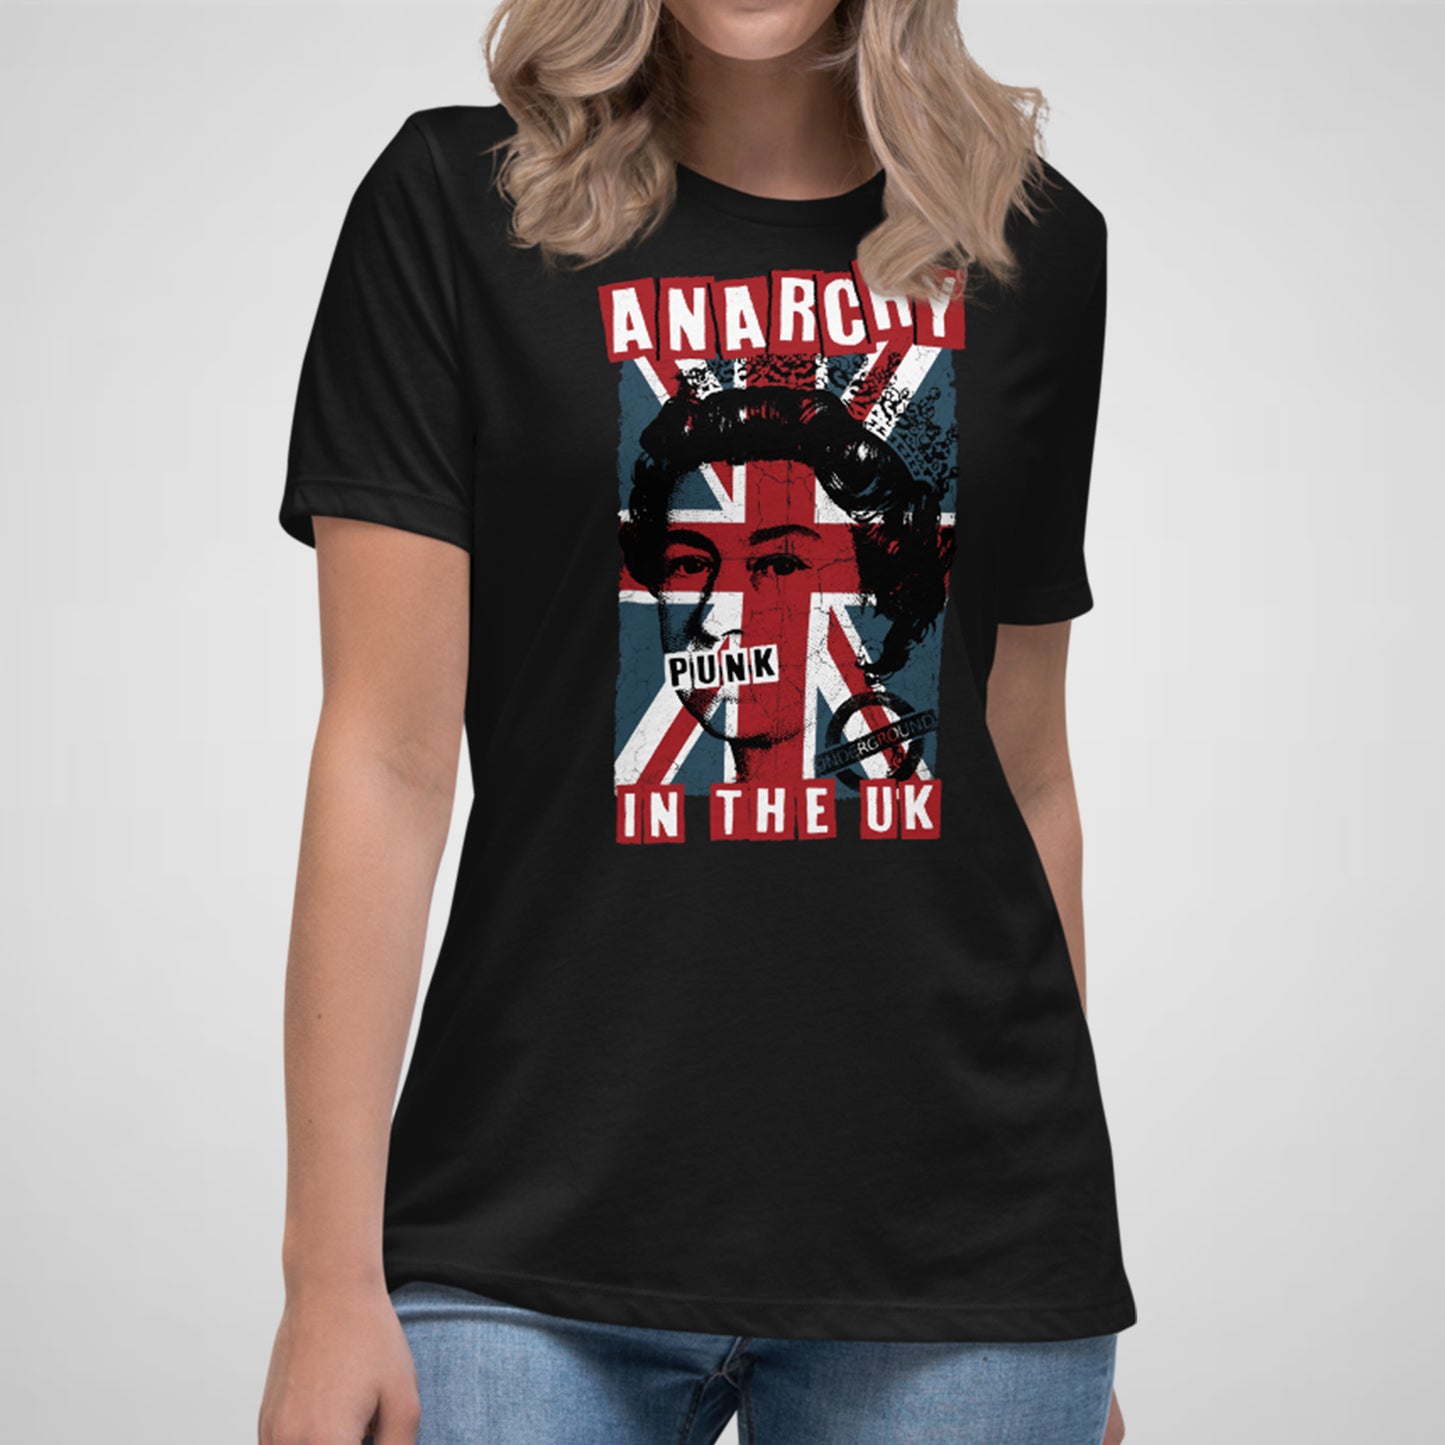 Anarchy in the UK - Women's Relaxed Cotton Tee